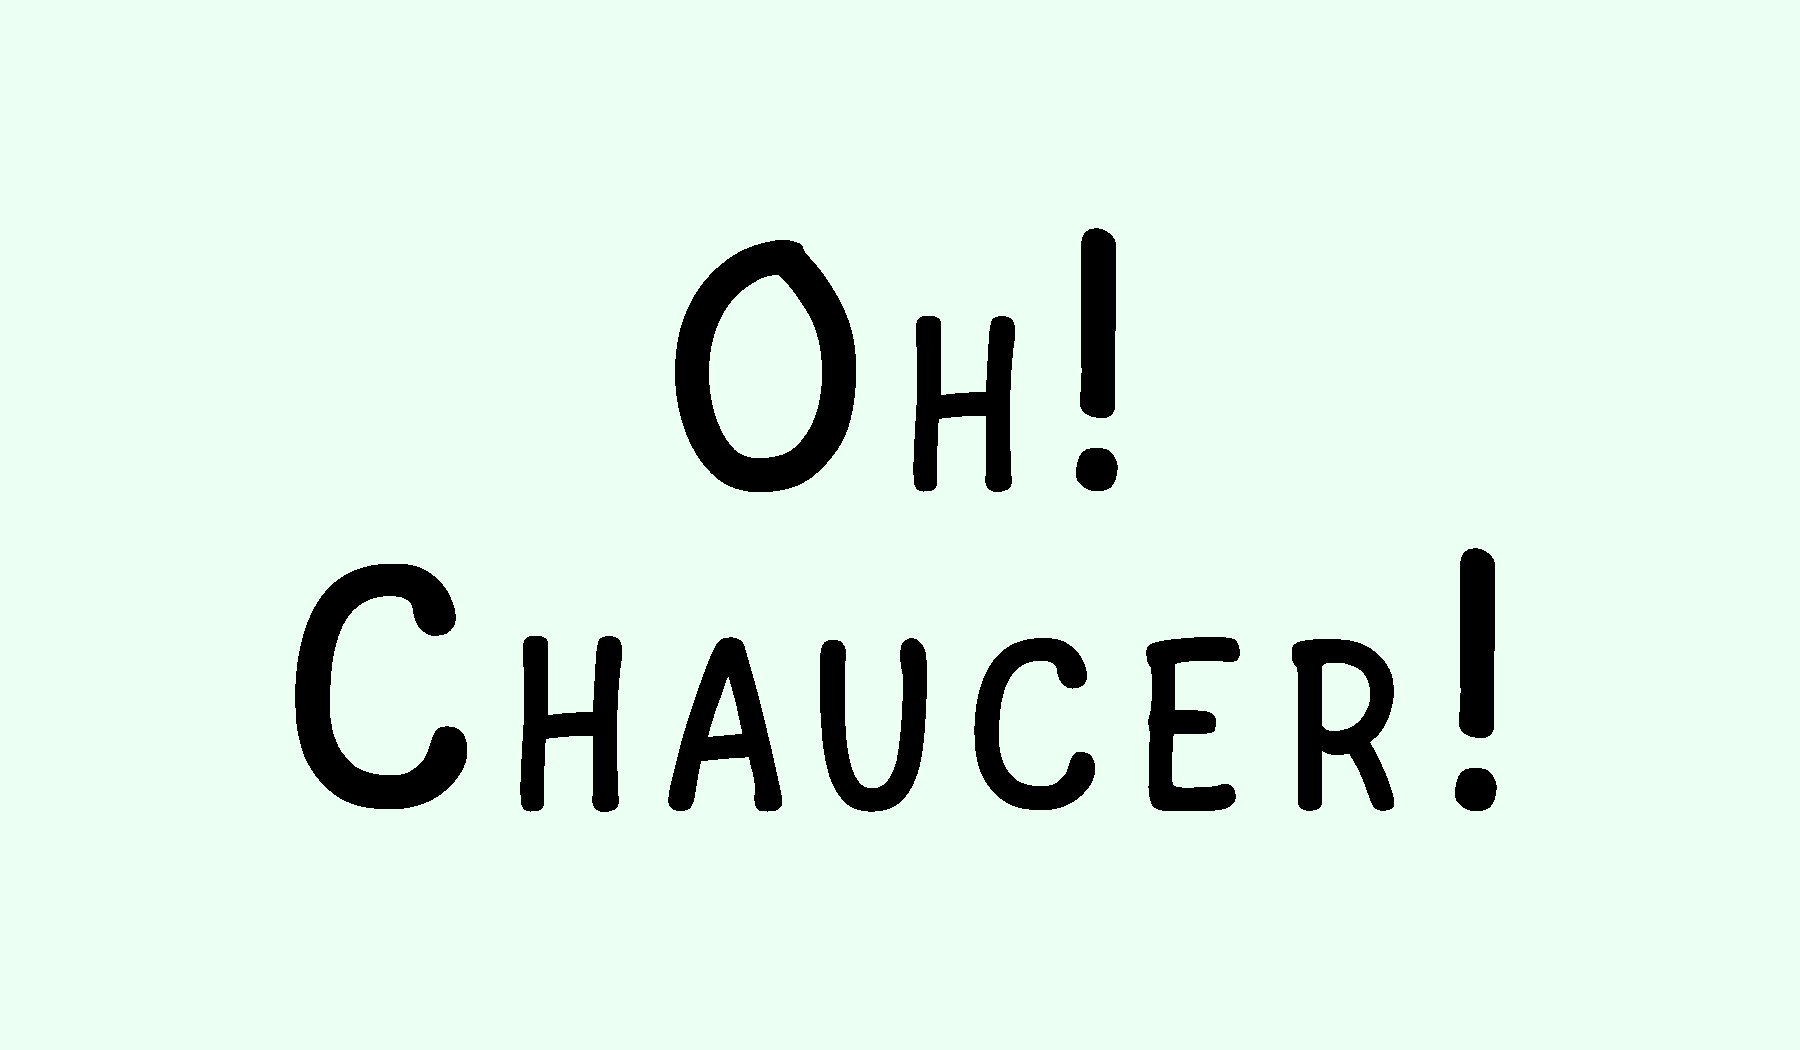 Oh! Chaucer!